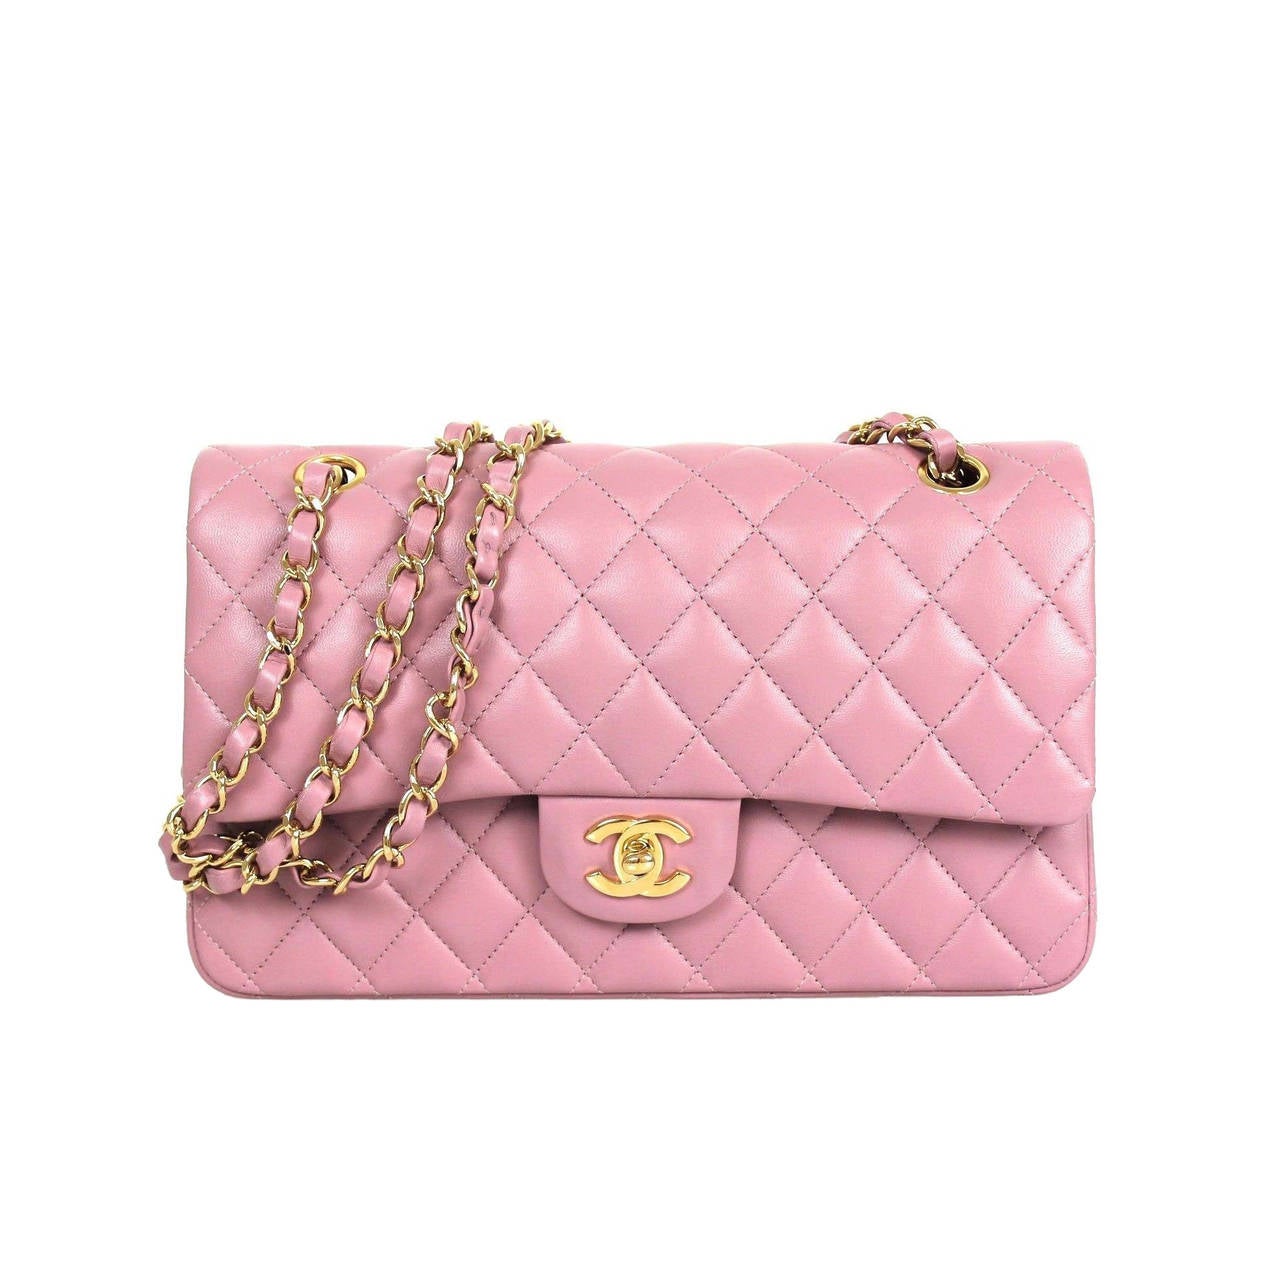 Chanel Lilac Quilted Lambskin Leather Gold Hdw Medium Double Flap Shoulder Bag For Sale